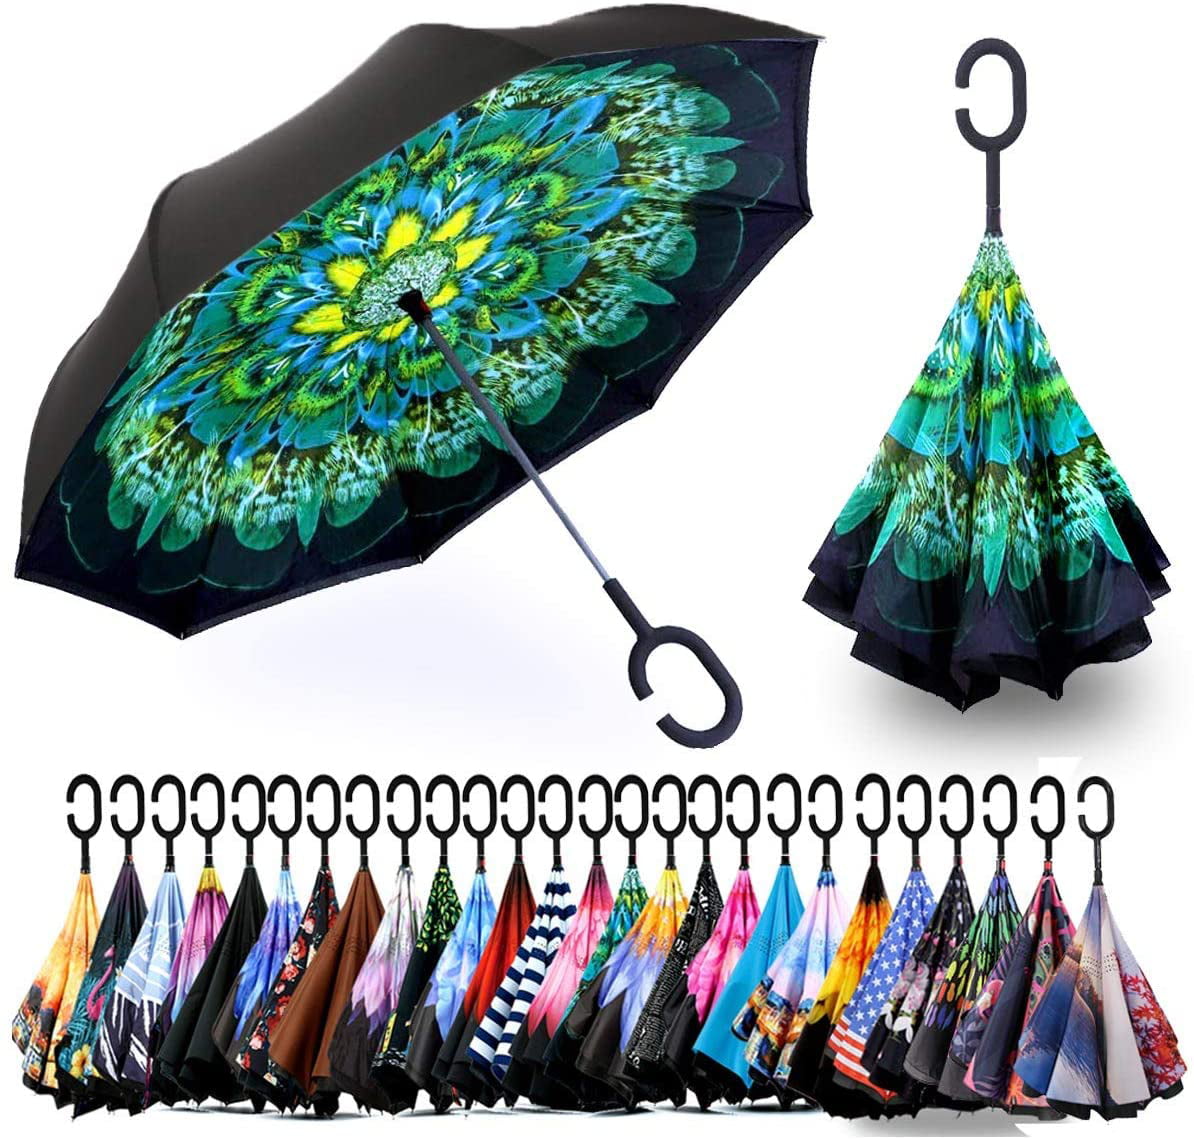 Anti-Uv Waterproo Saa Double Layer Inverted Umbrella With C-Shaped Handle Spar 